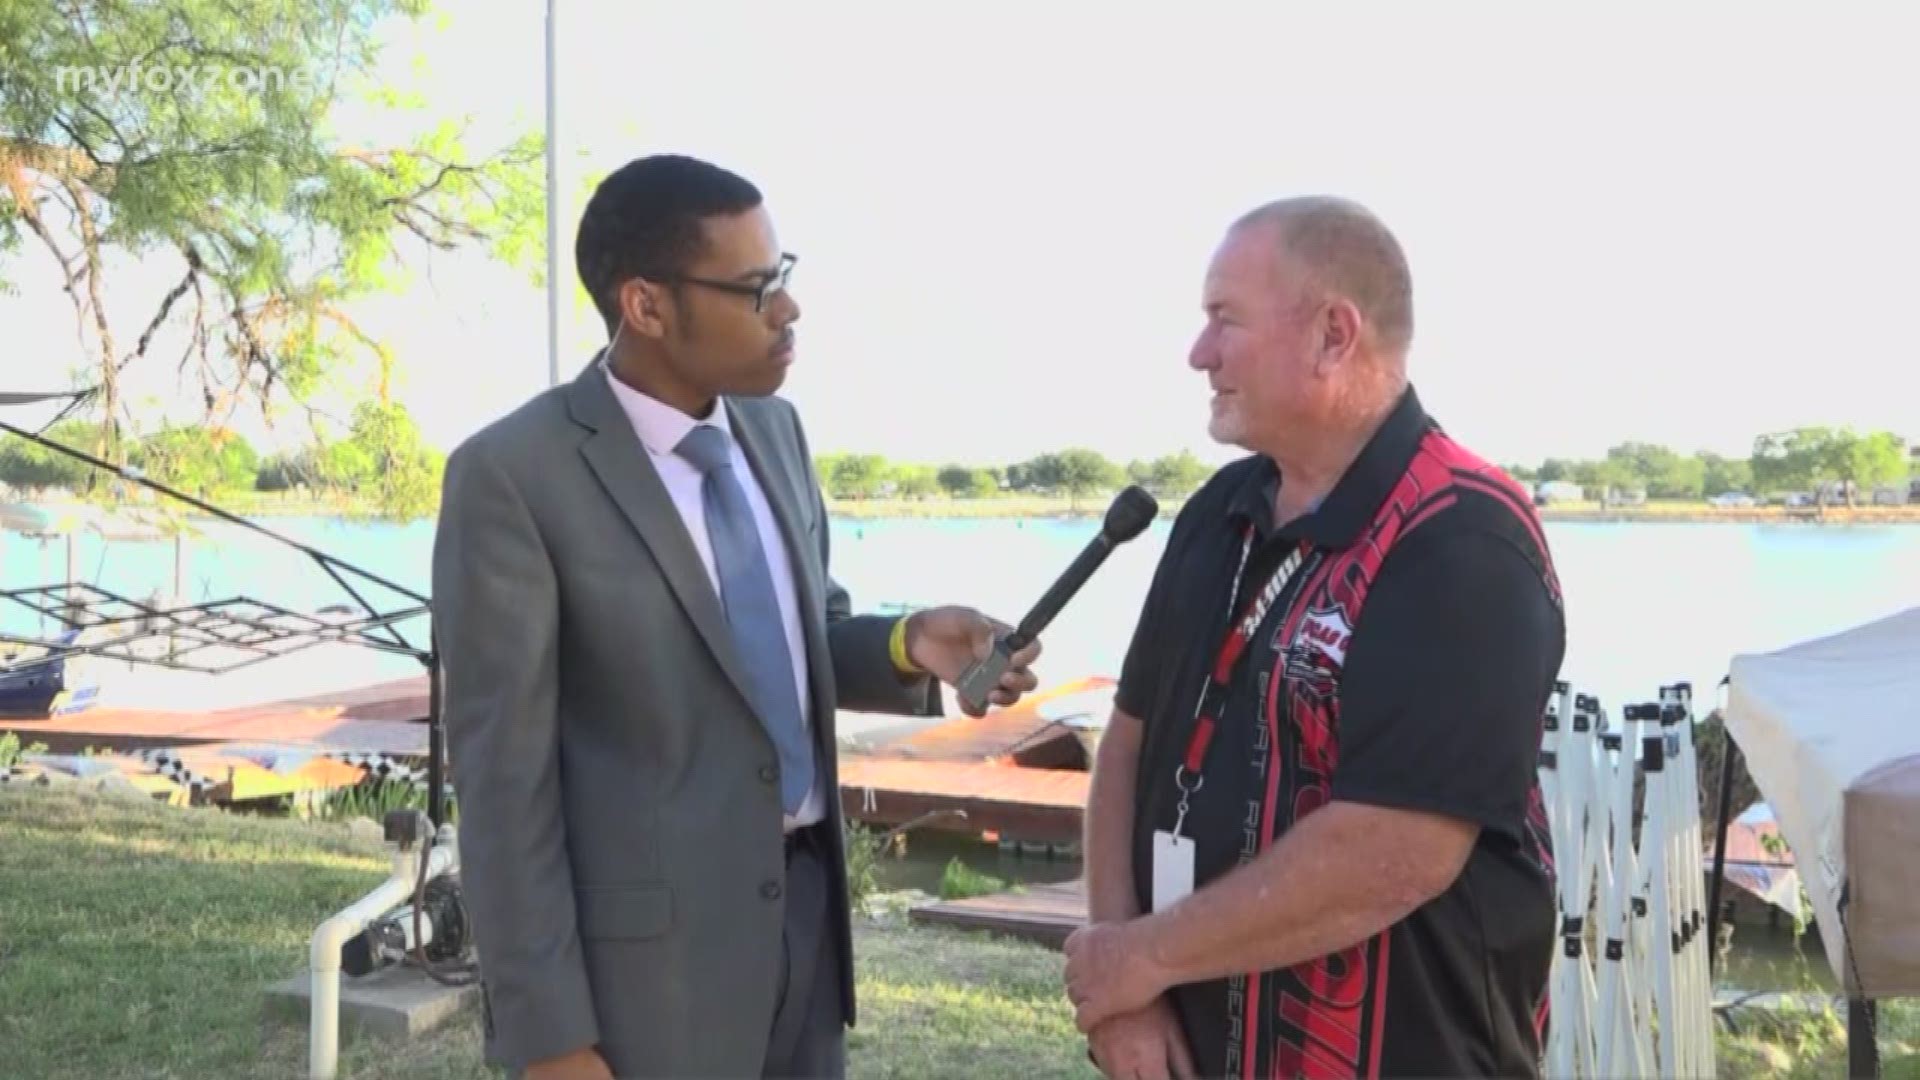 Our Malik Mingo is live out at Lake Nasworthy with details about the 12th annual boat races.